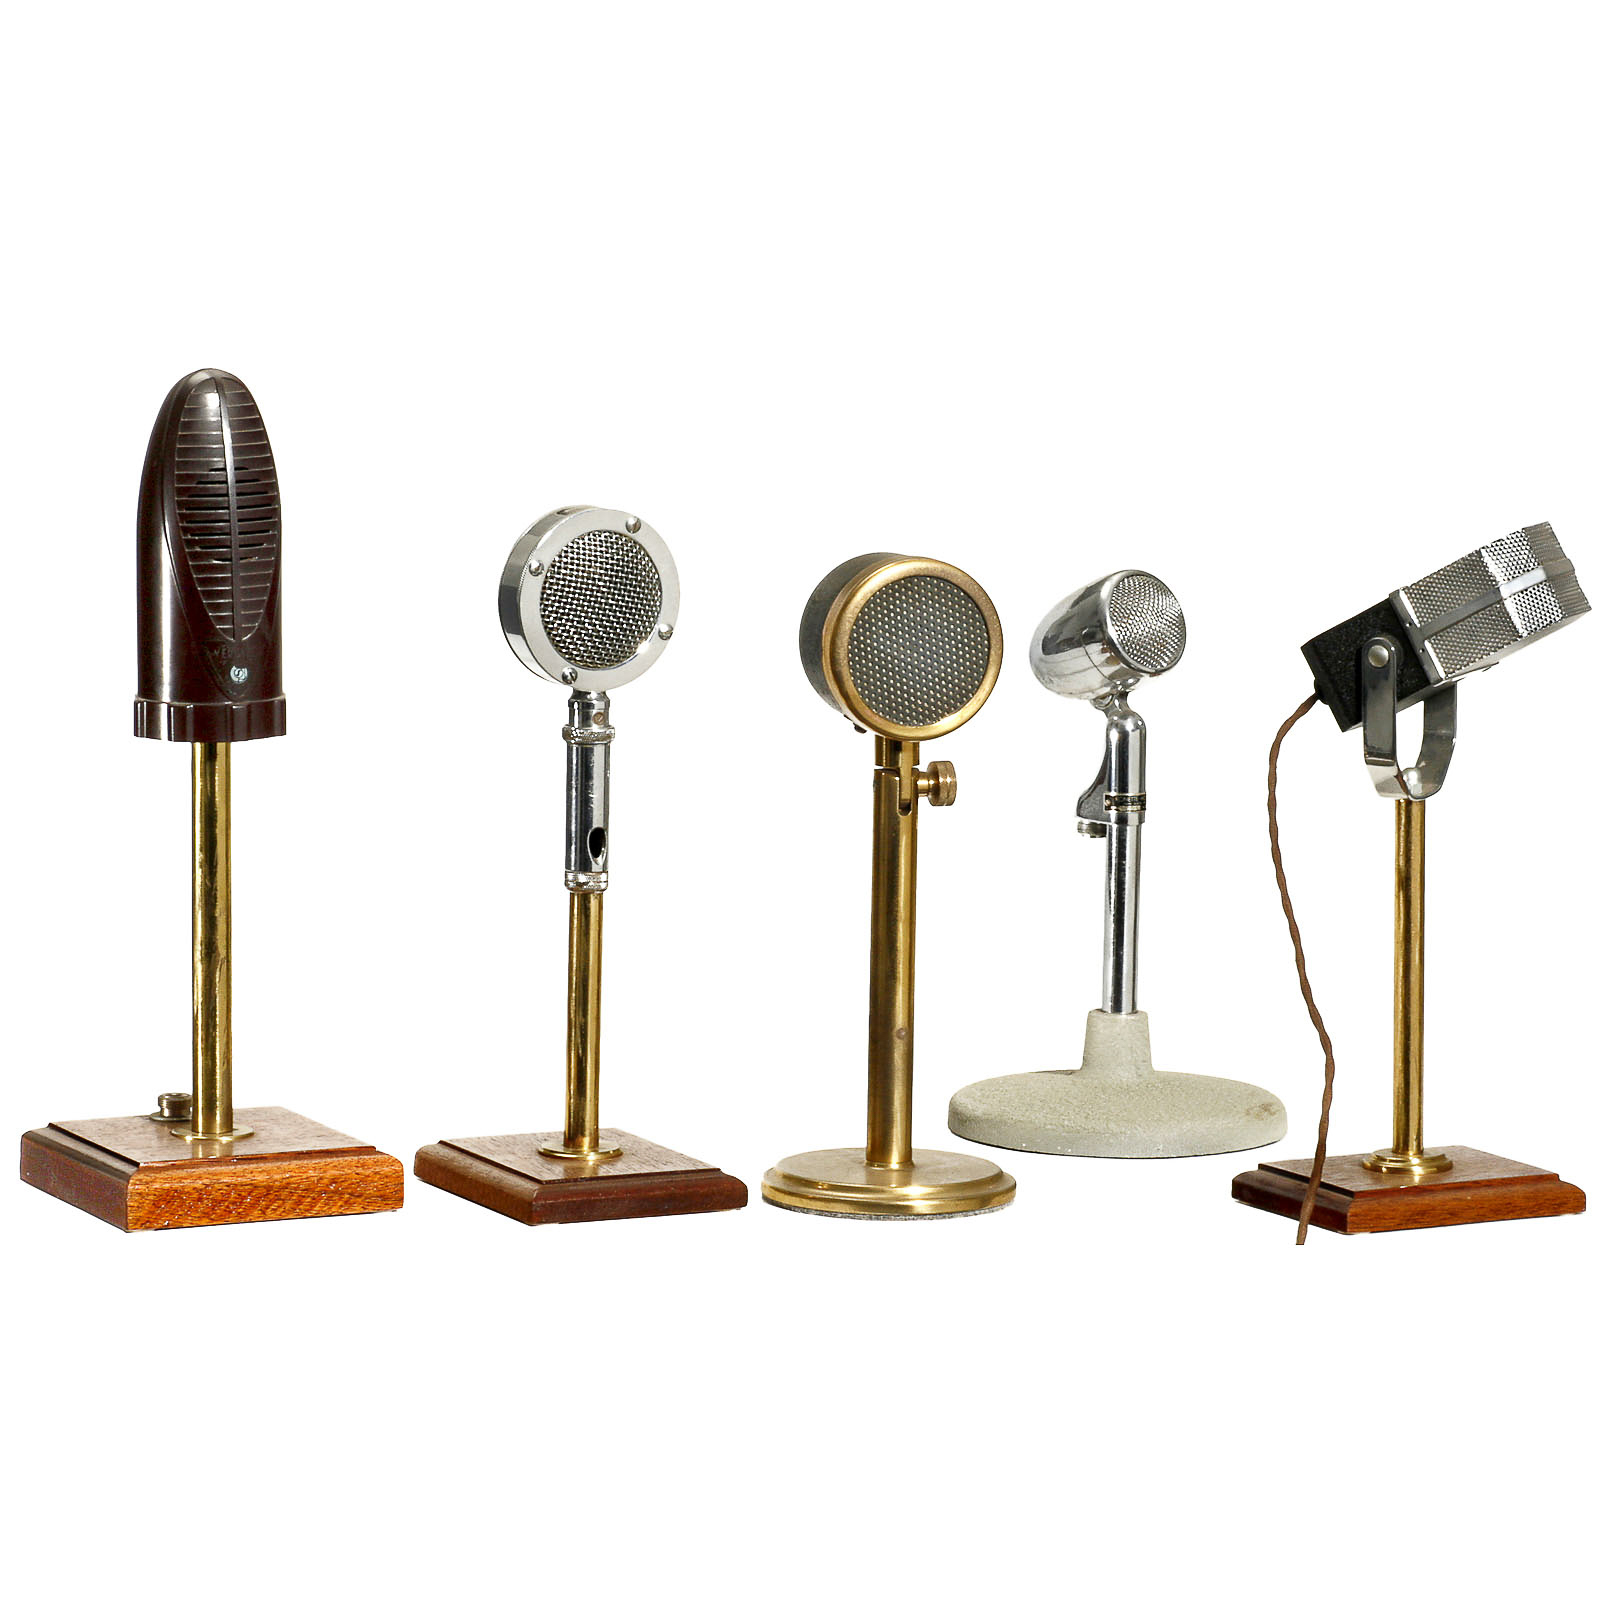 1 Crystal and 5 Magnetic Microphones, after 1935  Astatic type D-104, USA; unmarked, with - Image 3 of 3